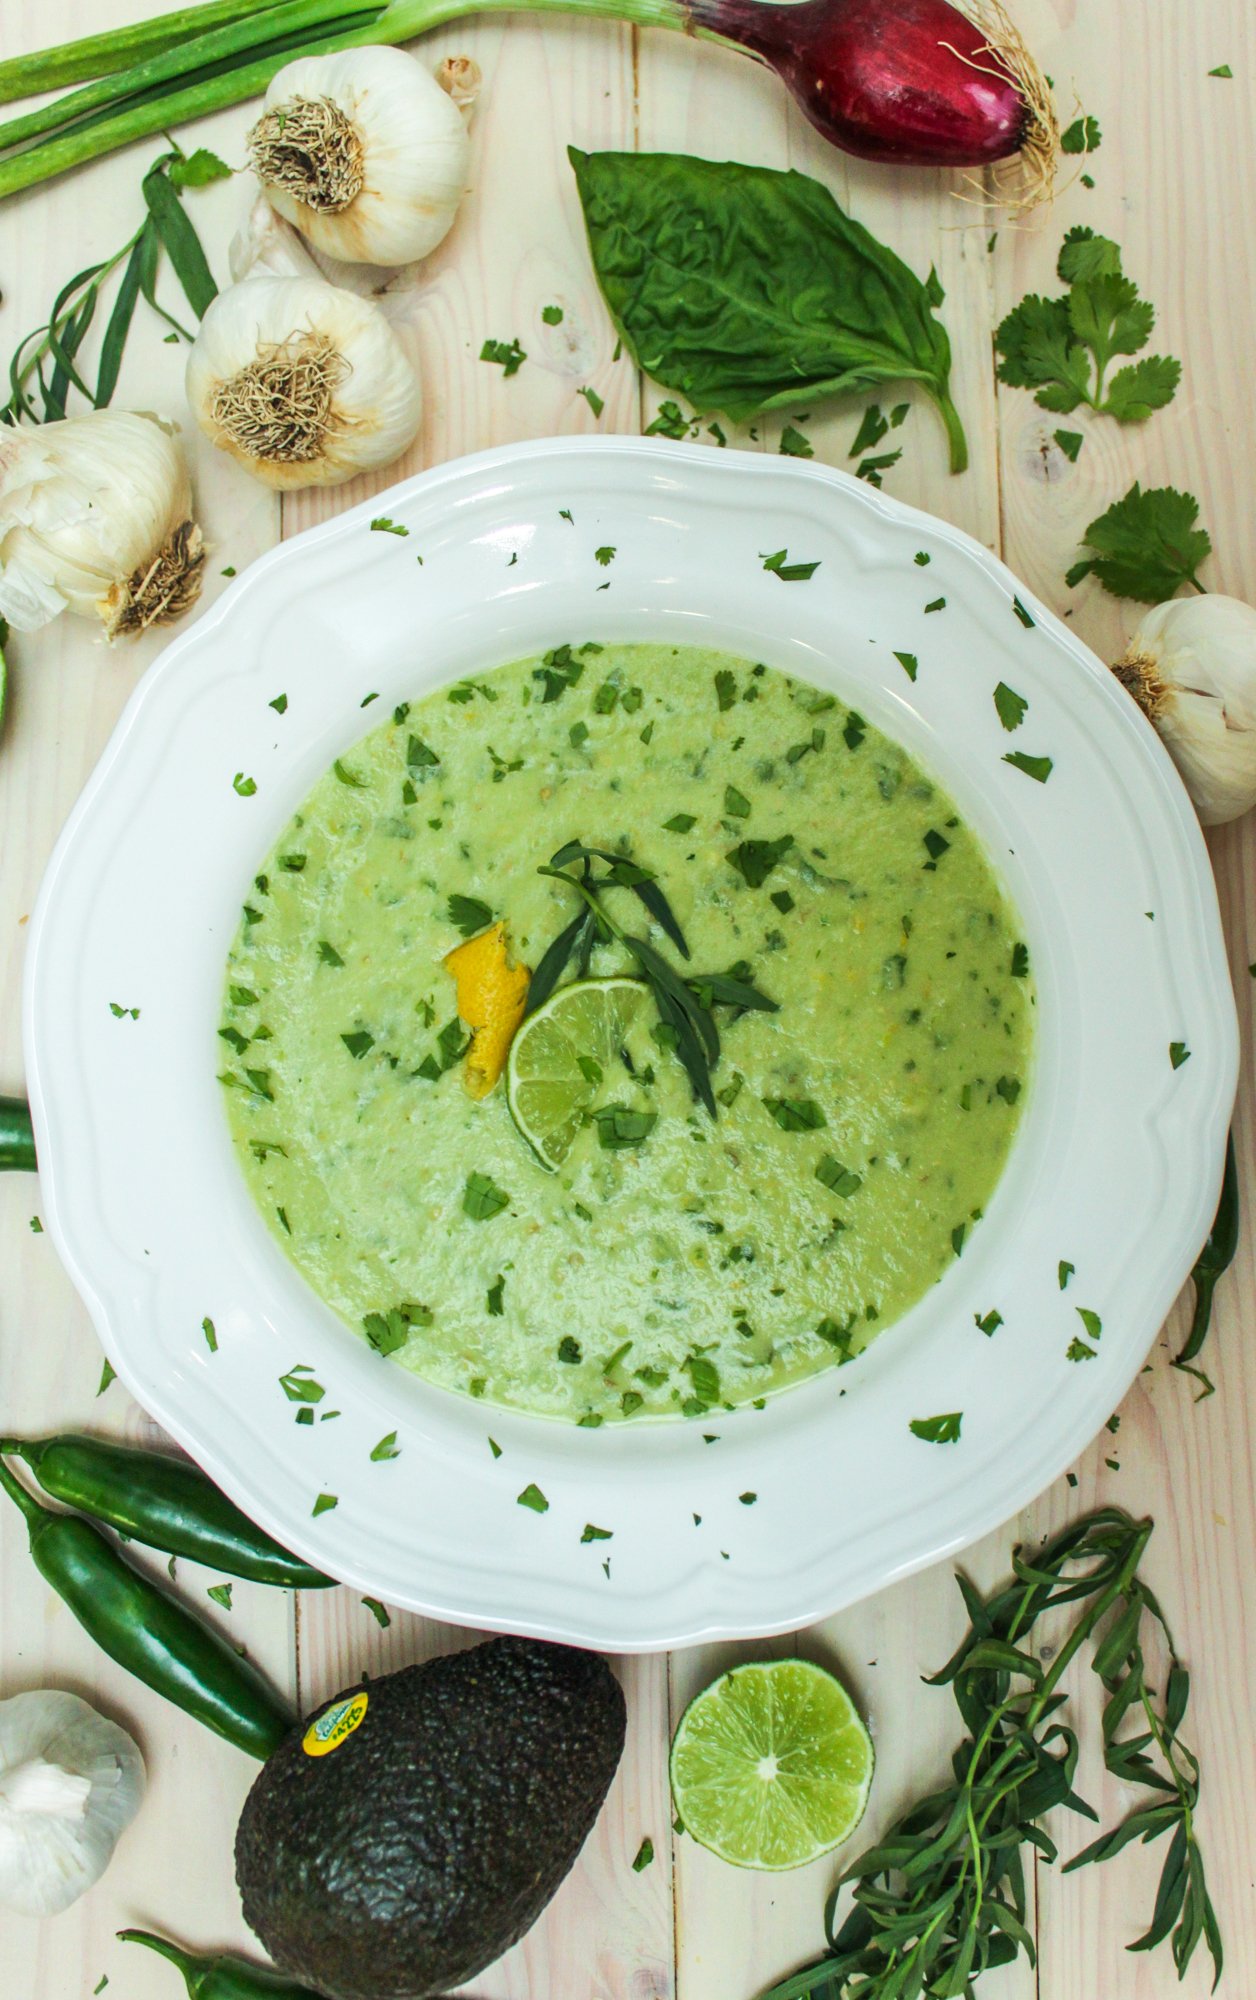 Cold Avocado Soup | Mouth-Watering Gazpacho Recipes You Won't Believe Are Healthy